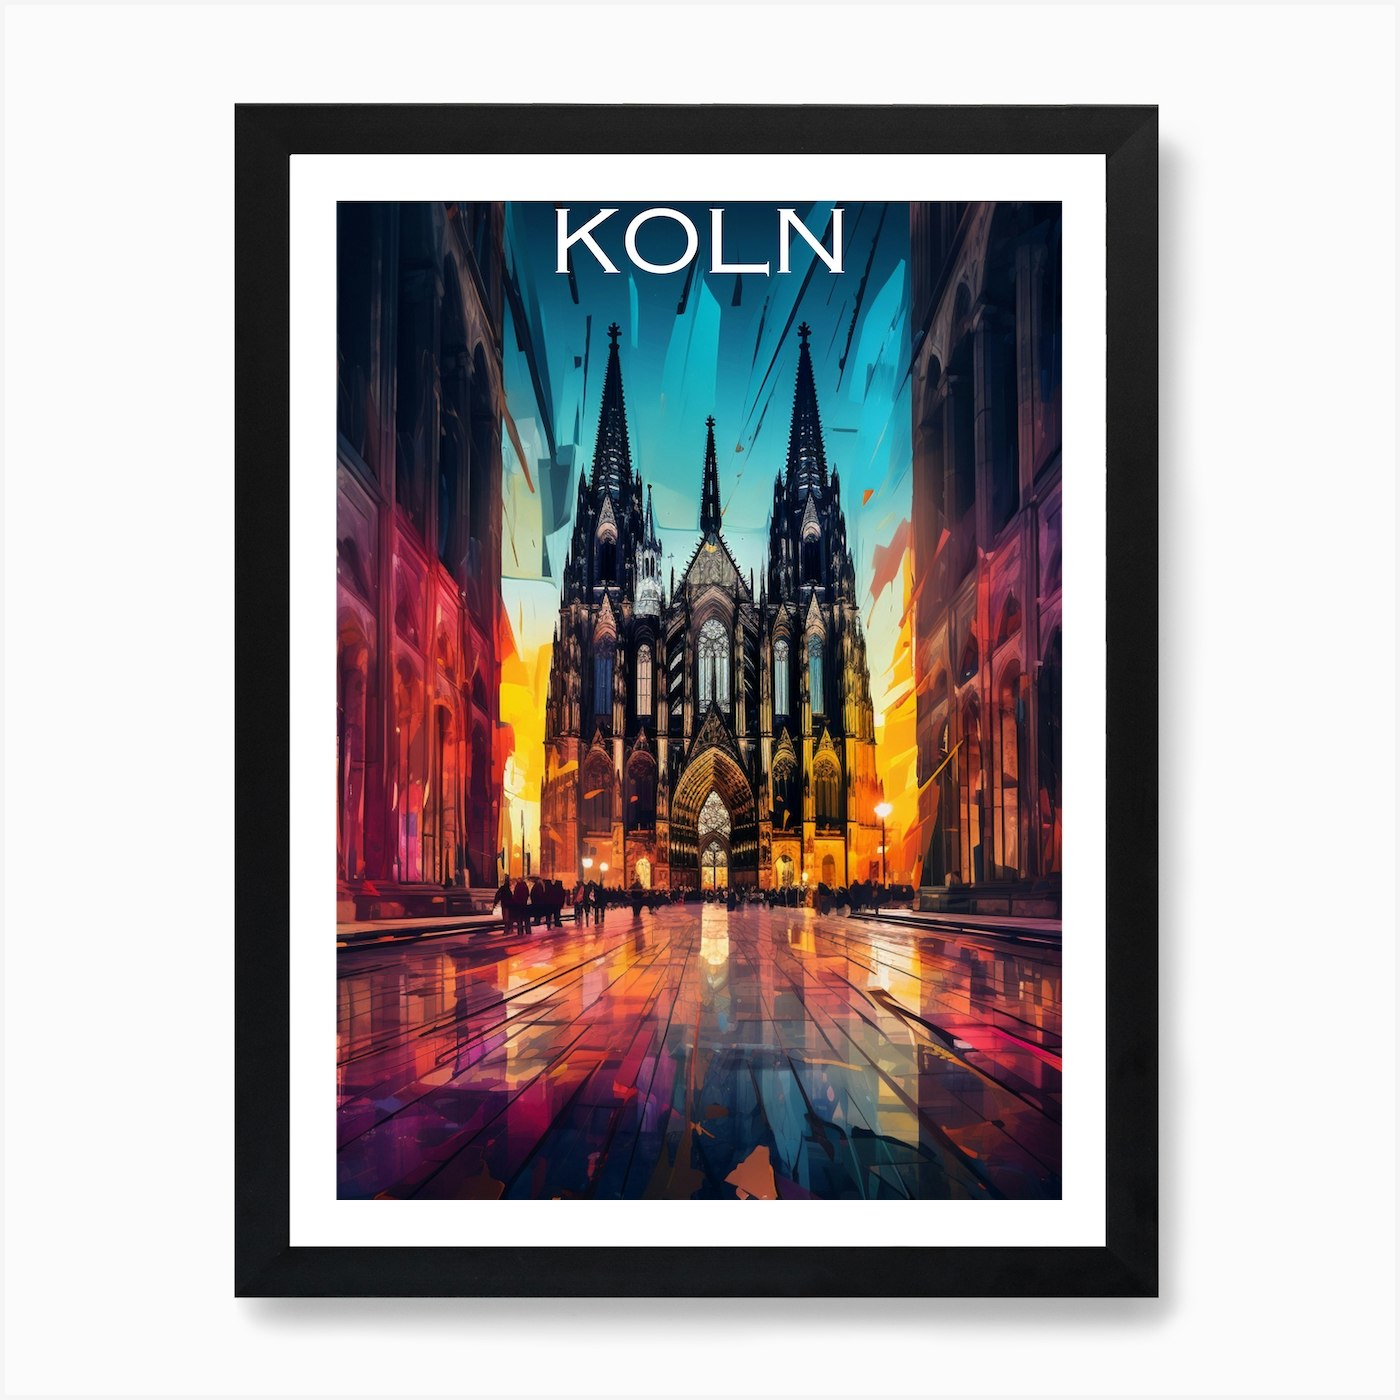 Fy Print Koln Colourful A by Germany travel poster Thing - Small Art